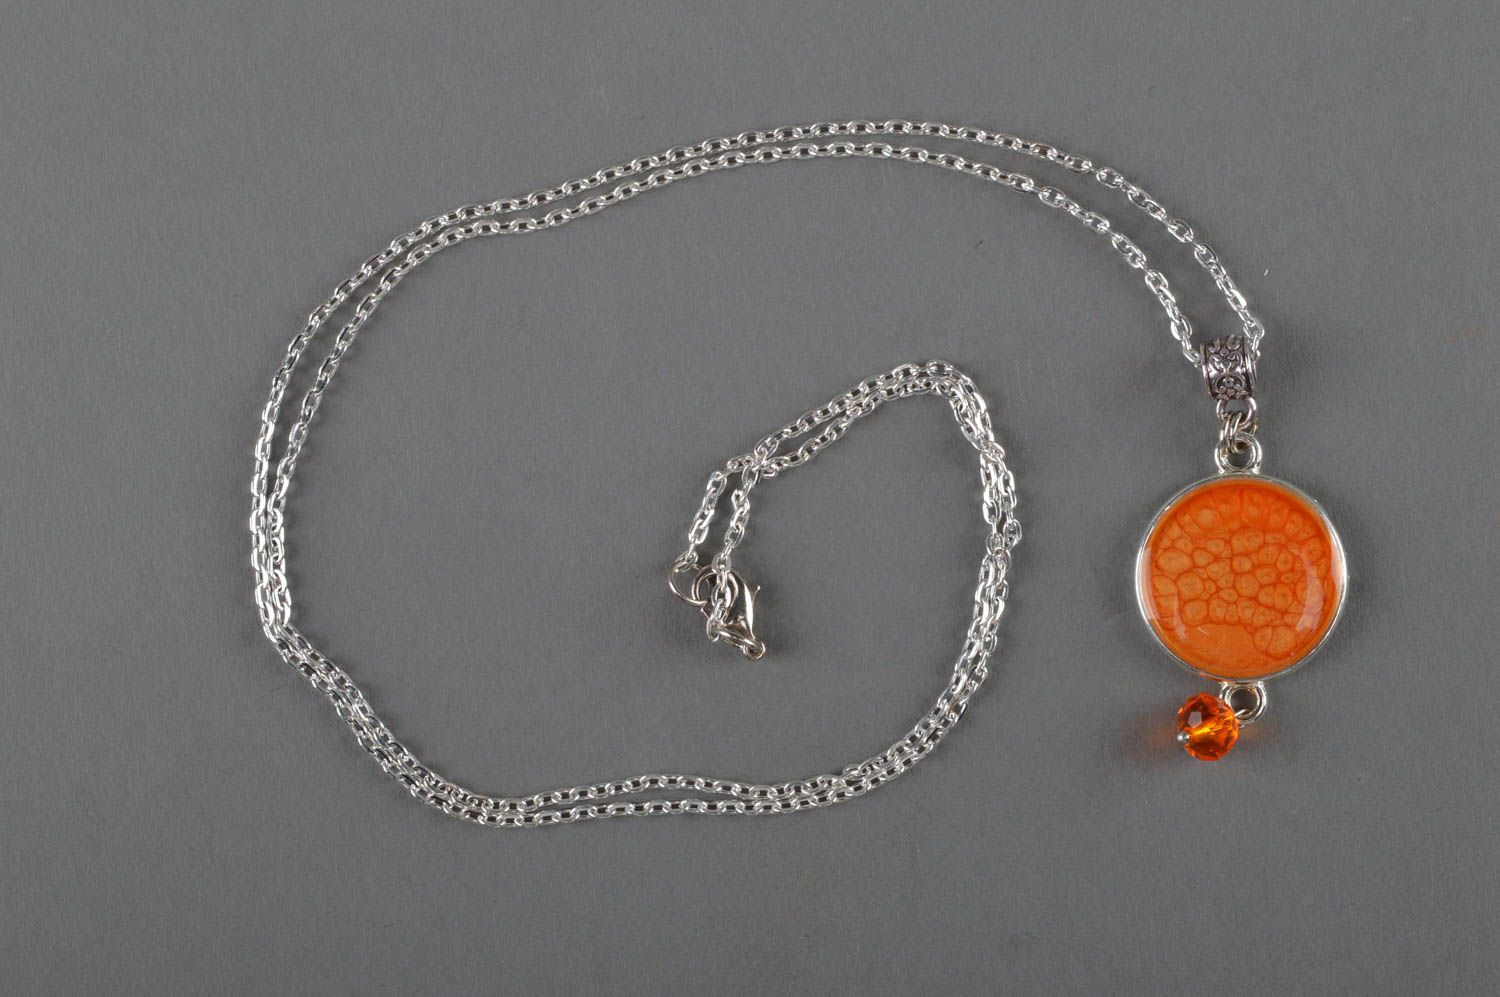 Handmade designer orange epoxy pendant decorated with decoupage and equipped with metal chain photo 1